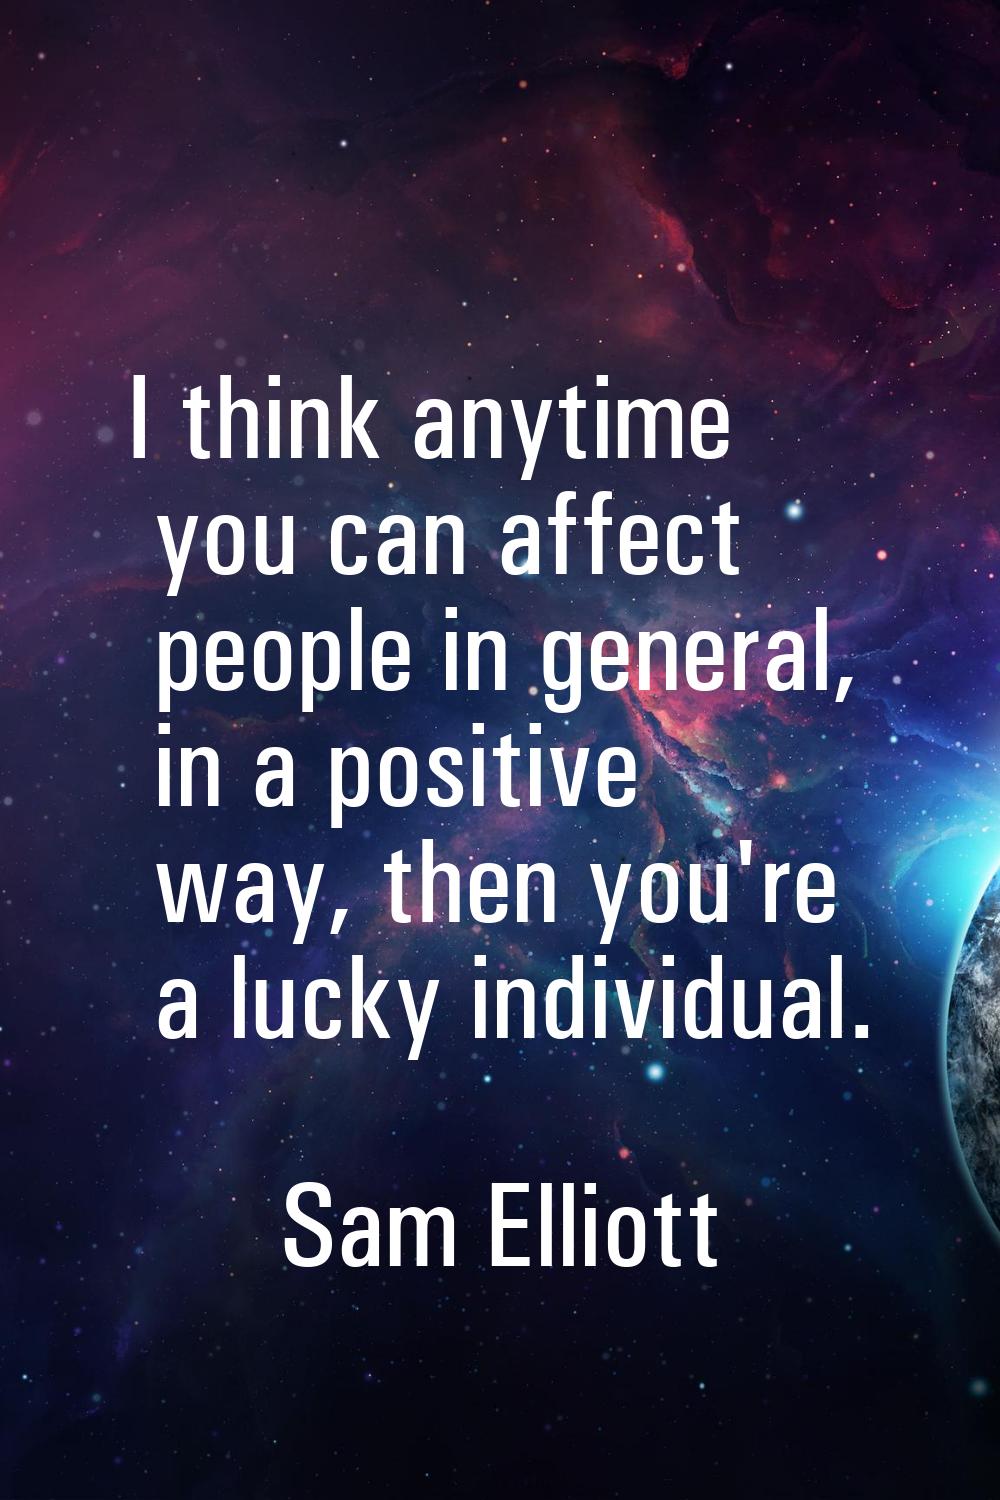 I think anytime you can affect people in general, in a positive way, then you're a lucky individual